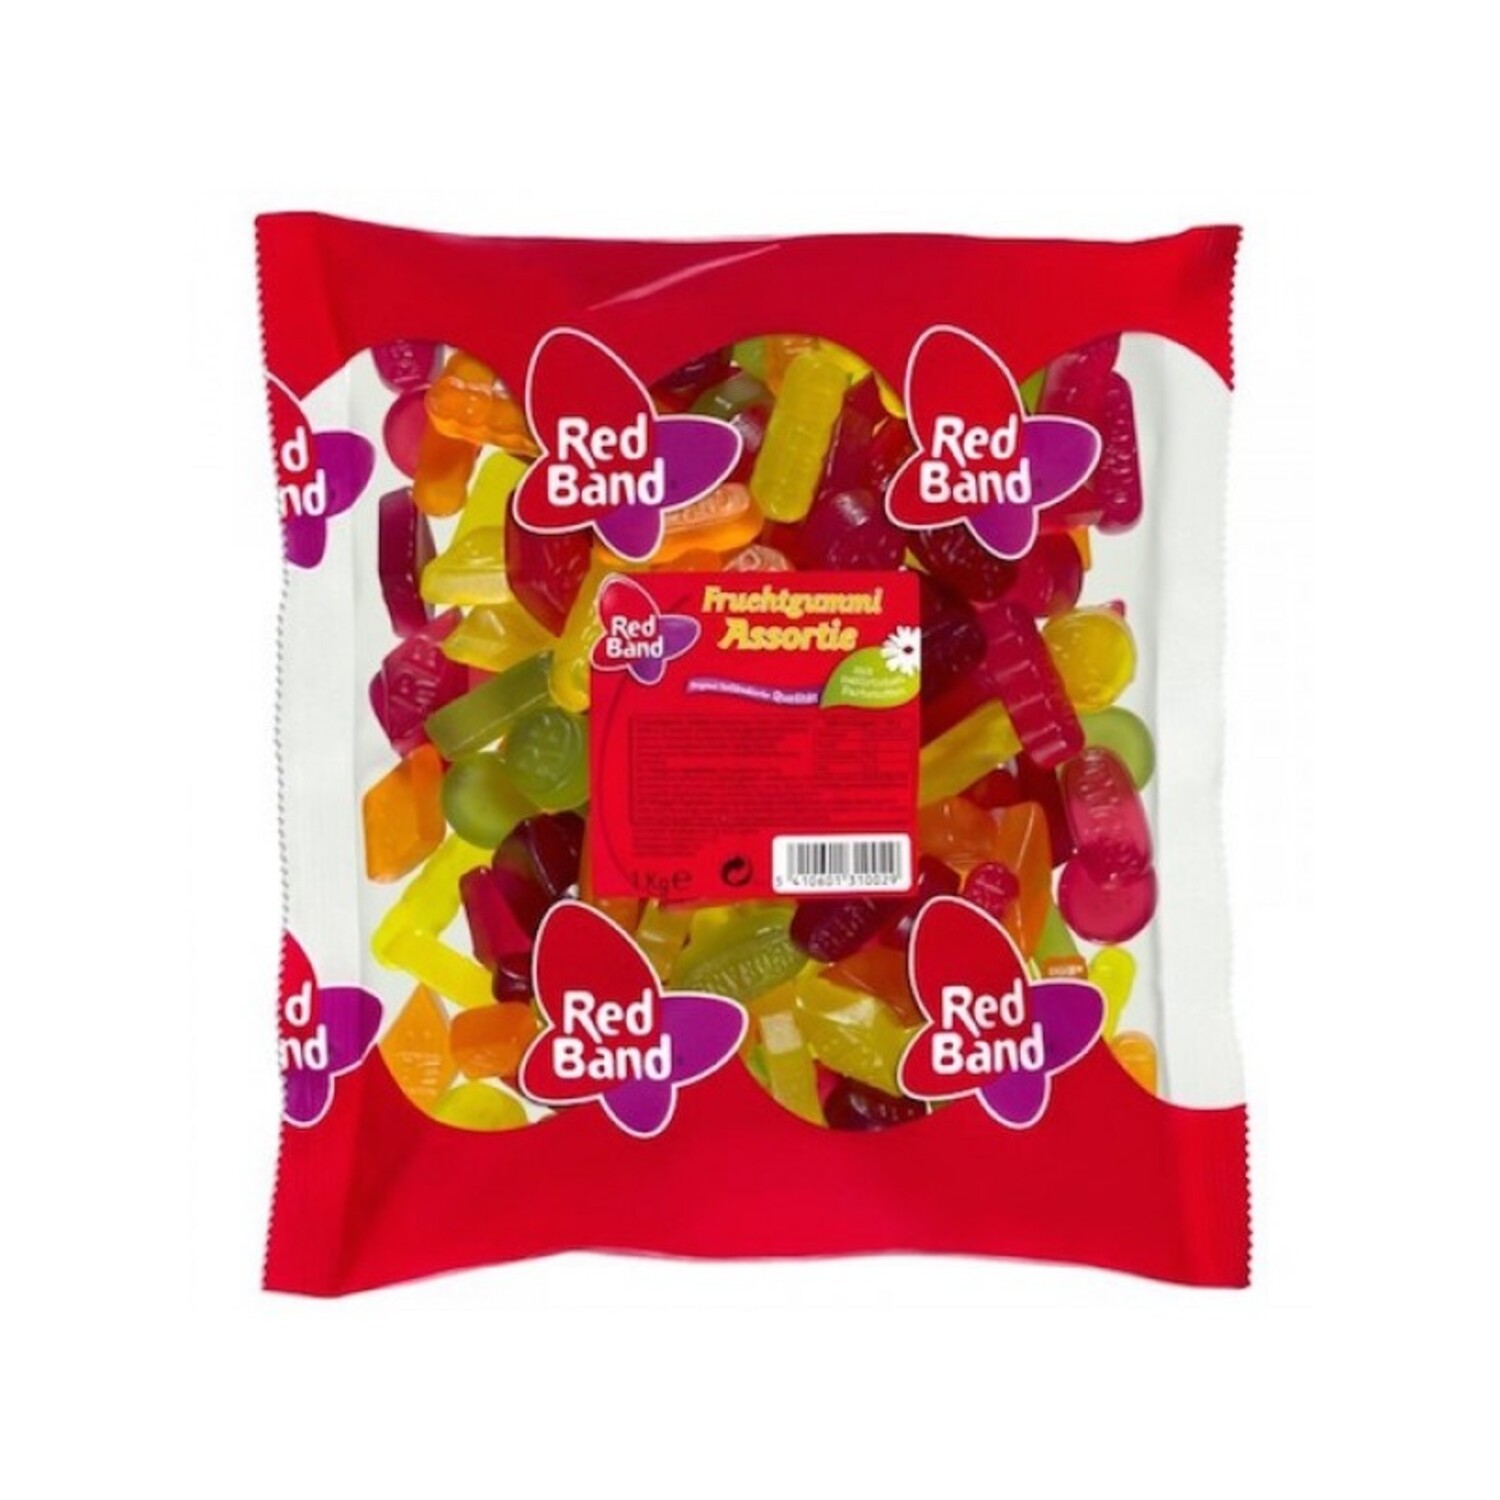 Red Band Red Band Winegums Assorted 2.2 Lb Bag